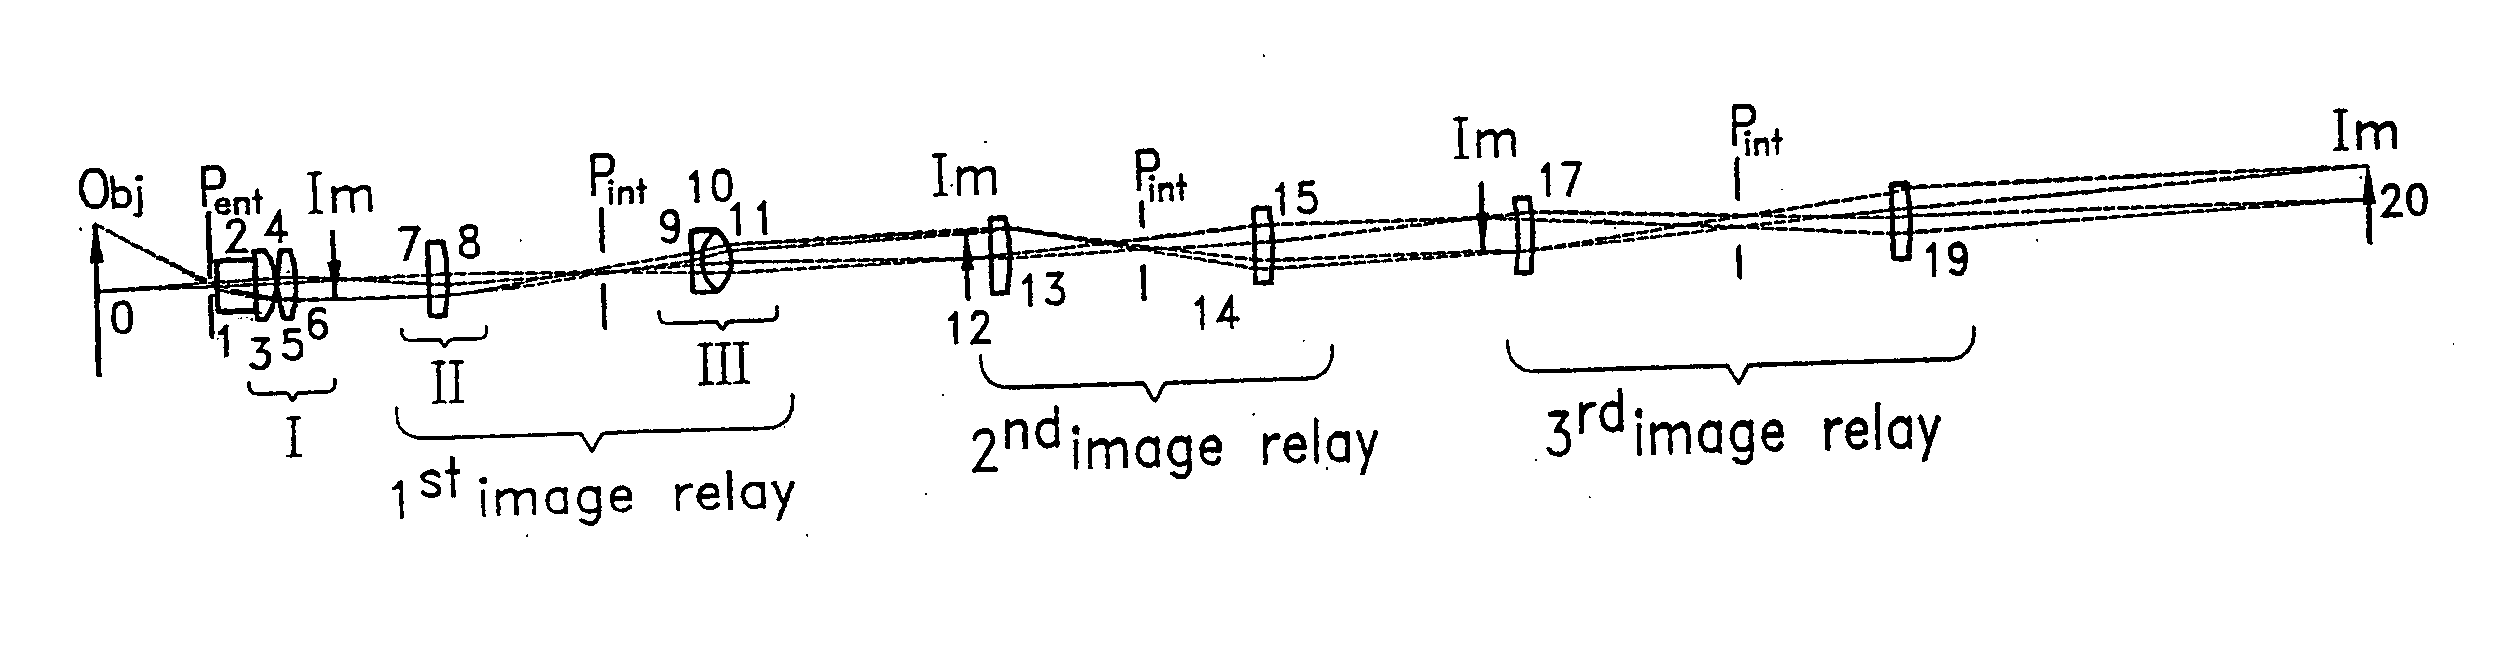 Integrated optical system for endoscopes and the like